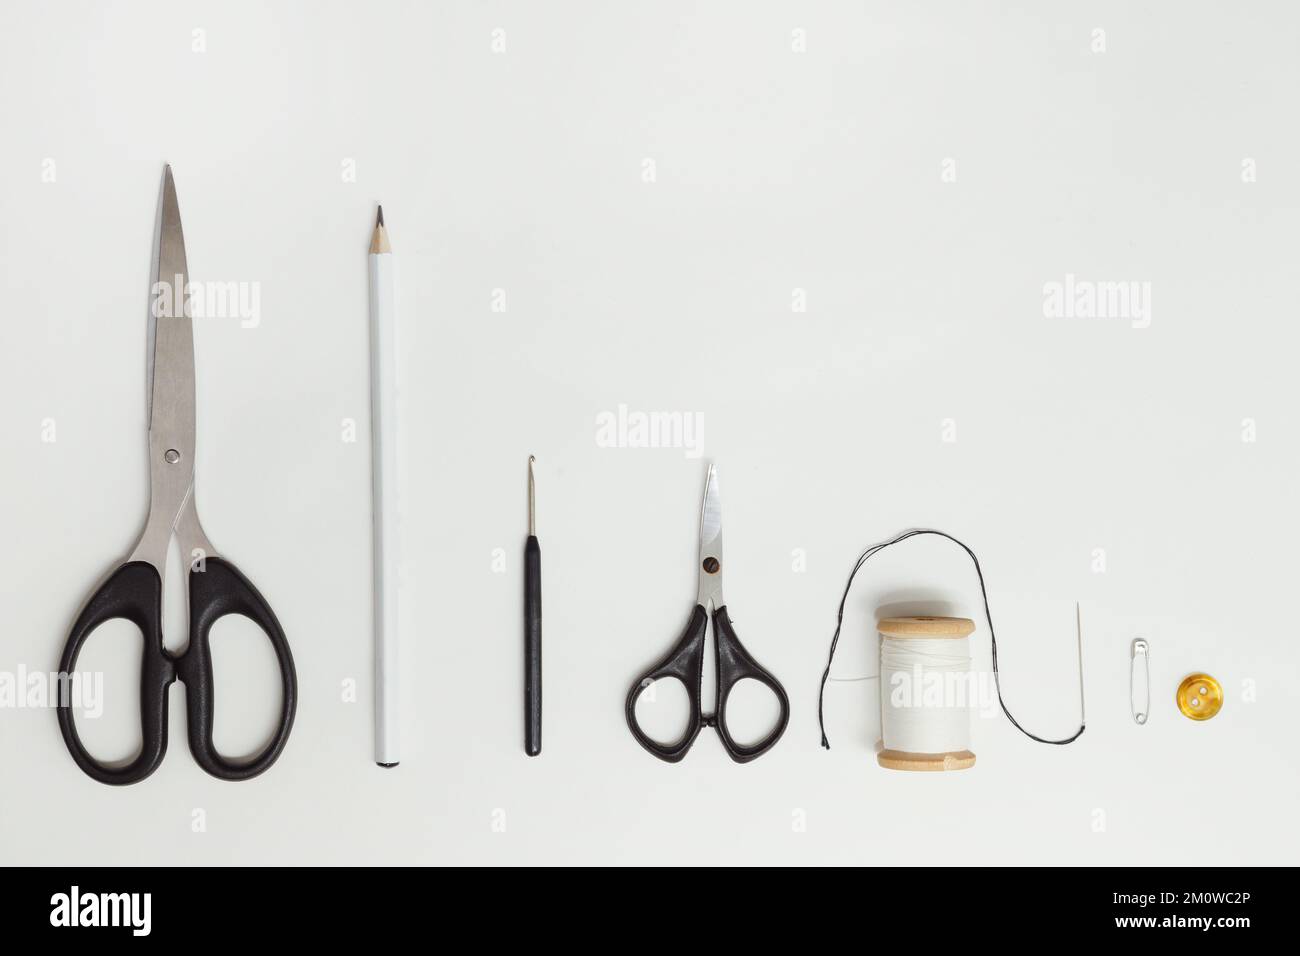 Scissors and sewing supplies on white desk. Sewing and knitting tools on white background, needlework concept. Top view on white Stock Photo